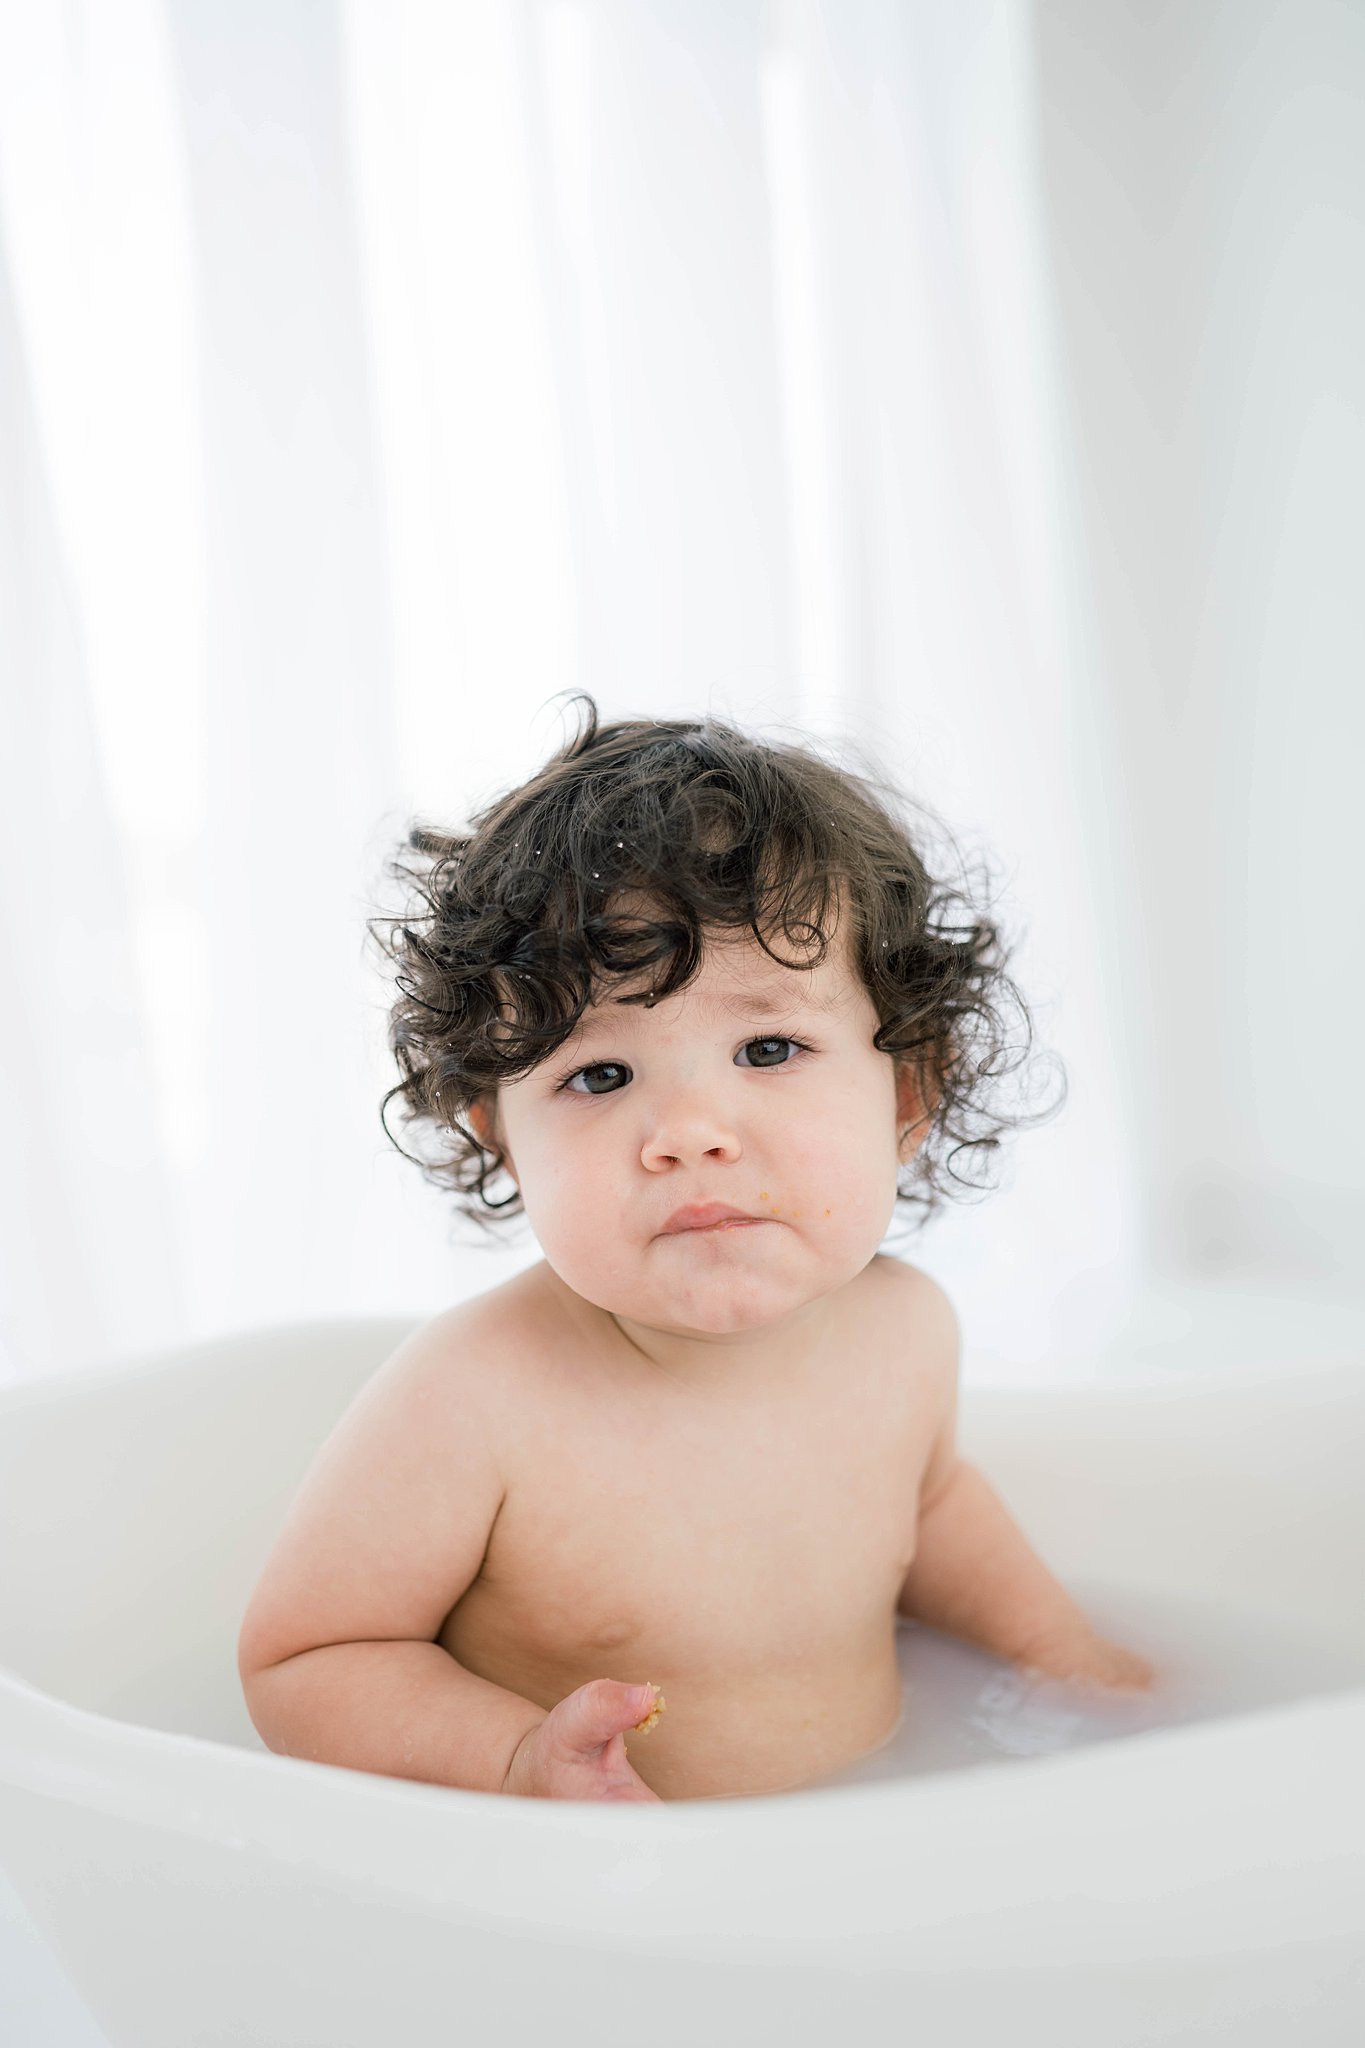 A young toddler with dark curly hair plays in a bathtub in front of a tall window with white curtains baby furniture Oklahoma